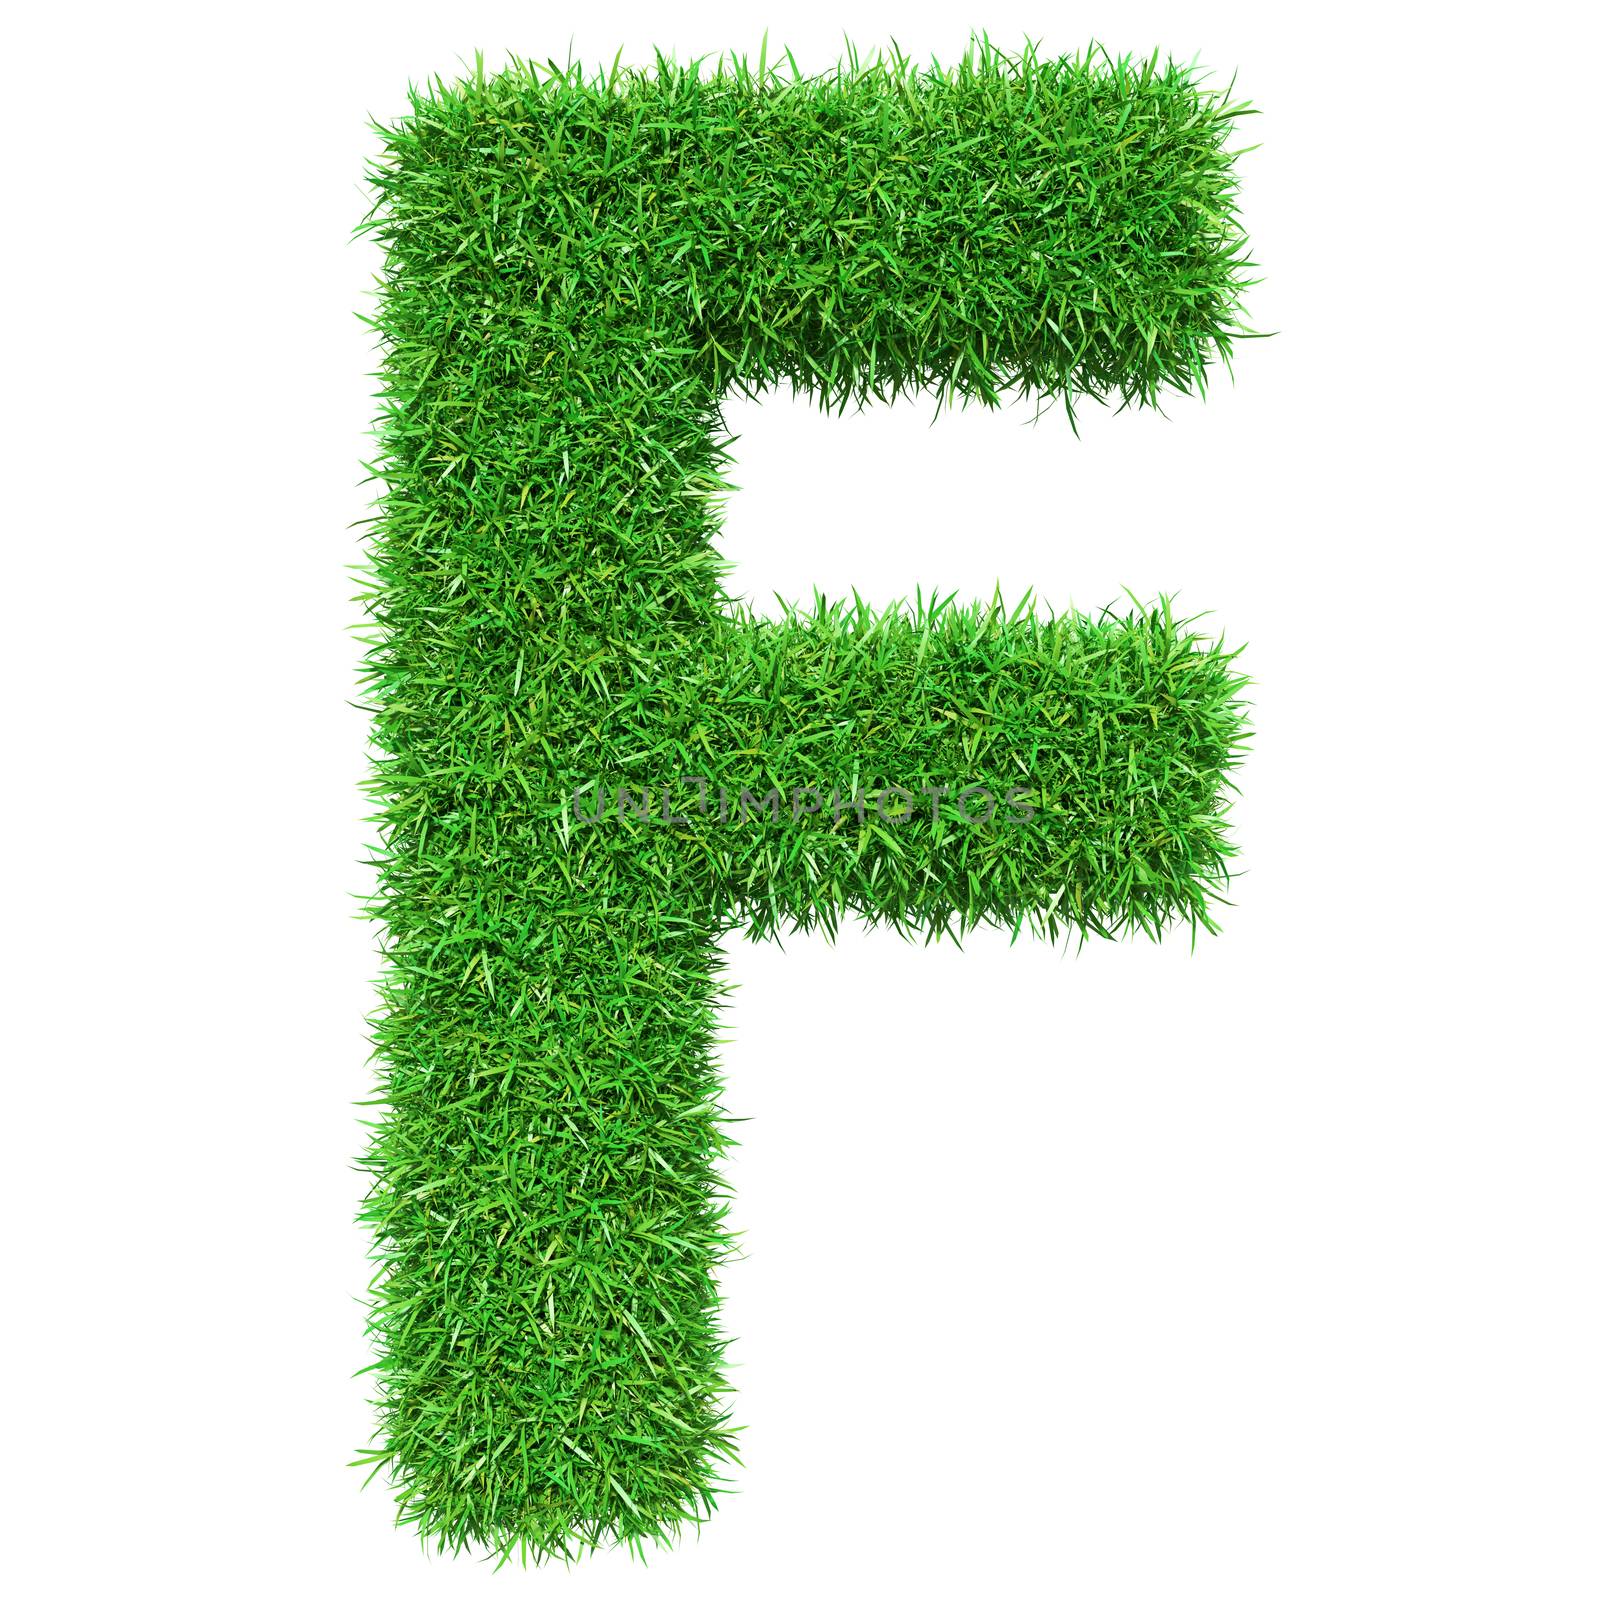 Green Grass Letter F by cherezoff